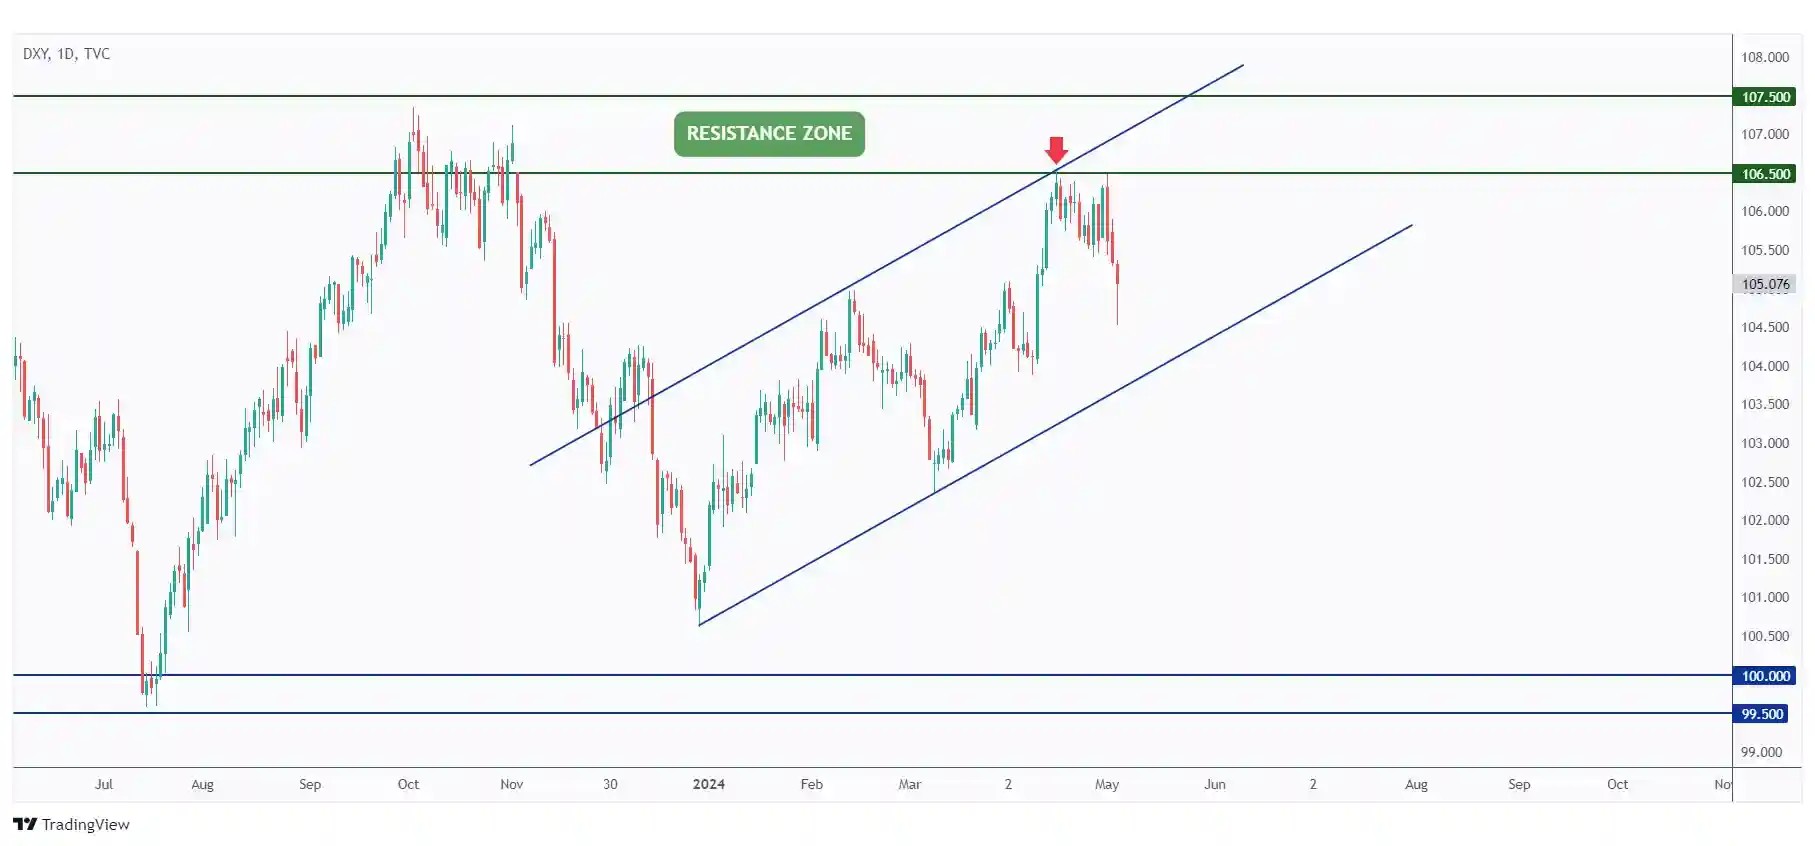 DXY daily chart rejected the upper bound of the rising channel and currently in a correction phase towards the lower bound.